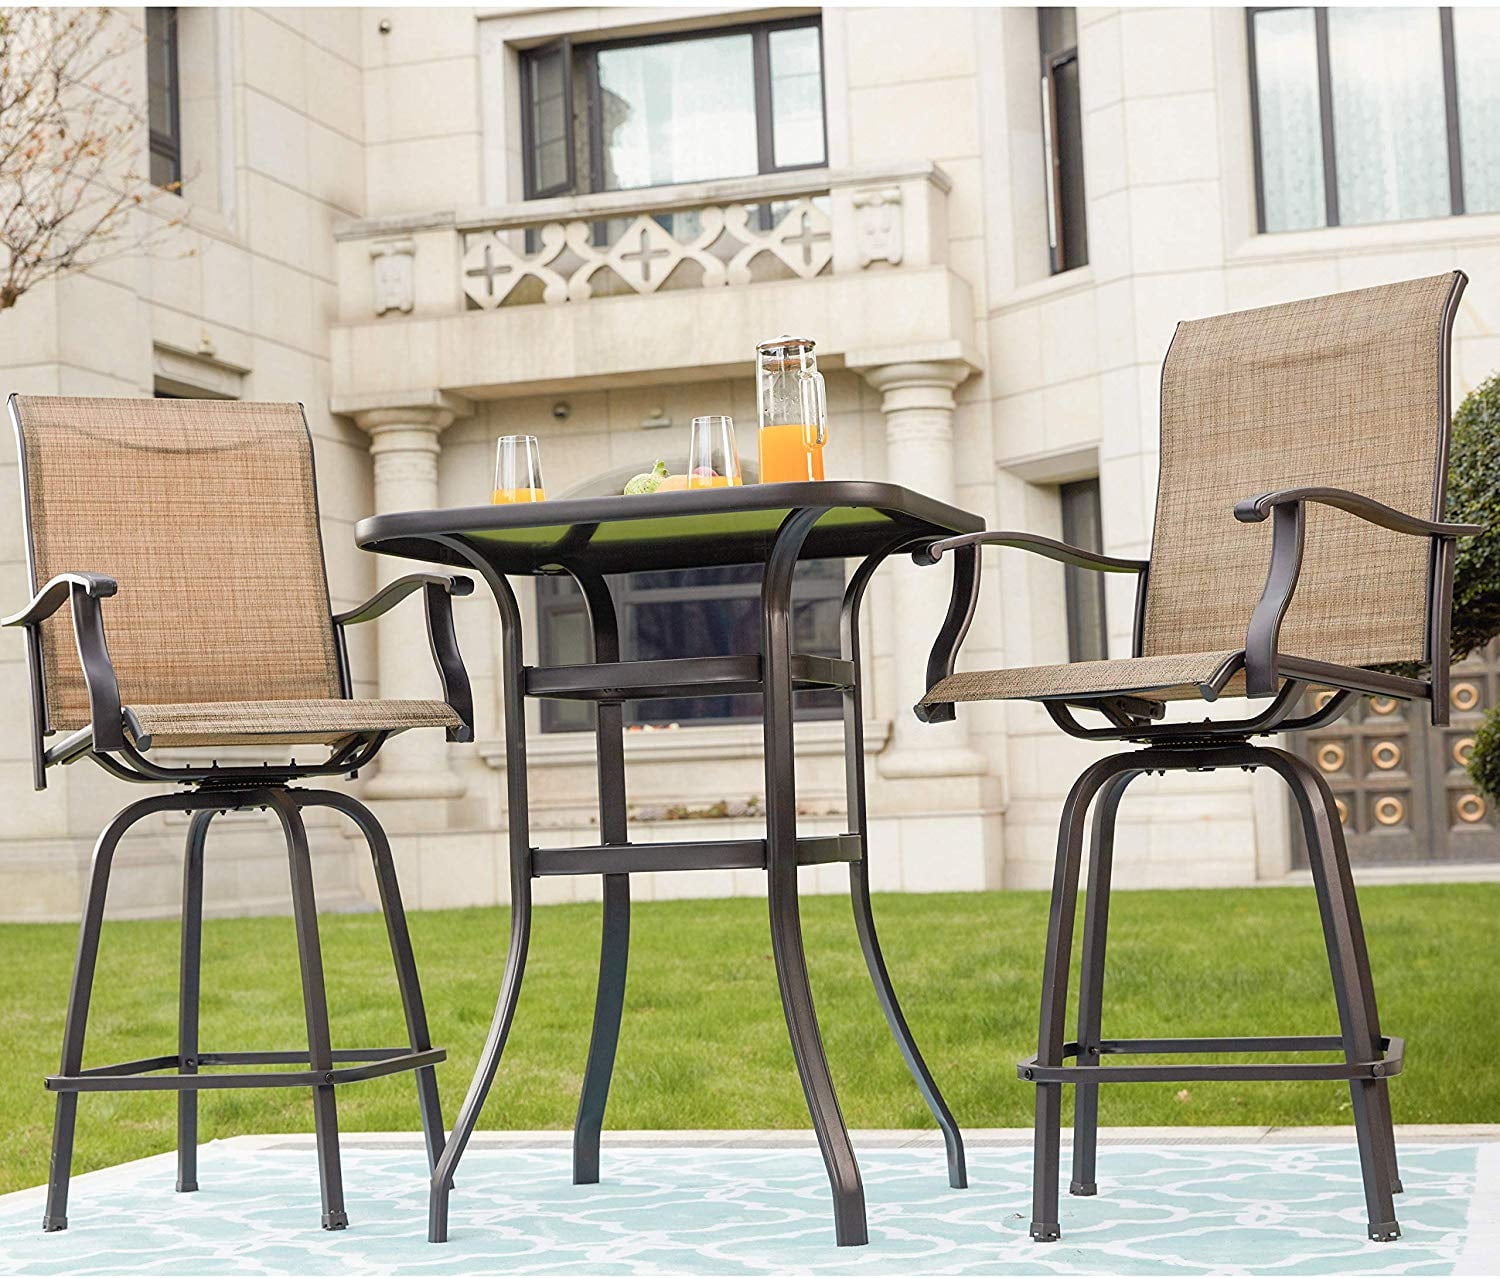 Outdoor Bar Table And Stools - Kitchen Island Small With Seating # ...